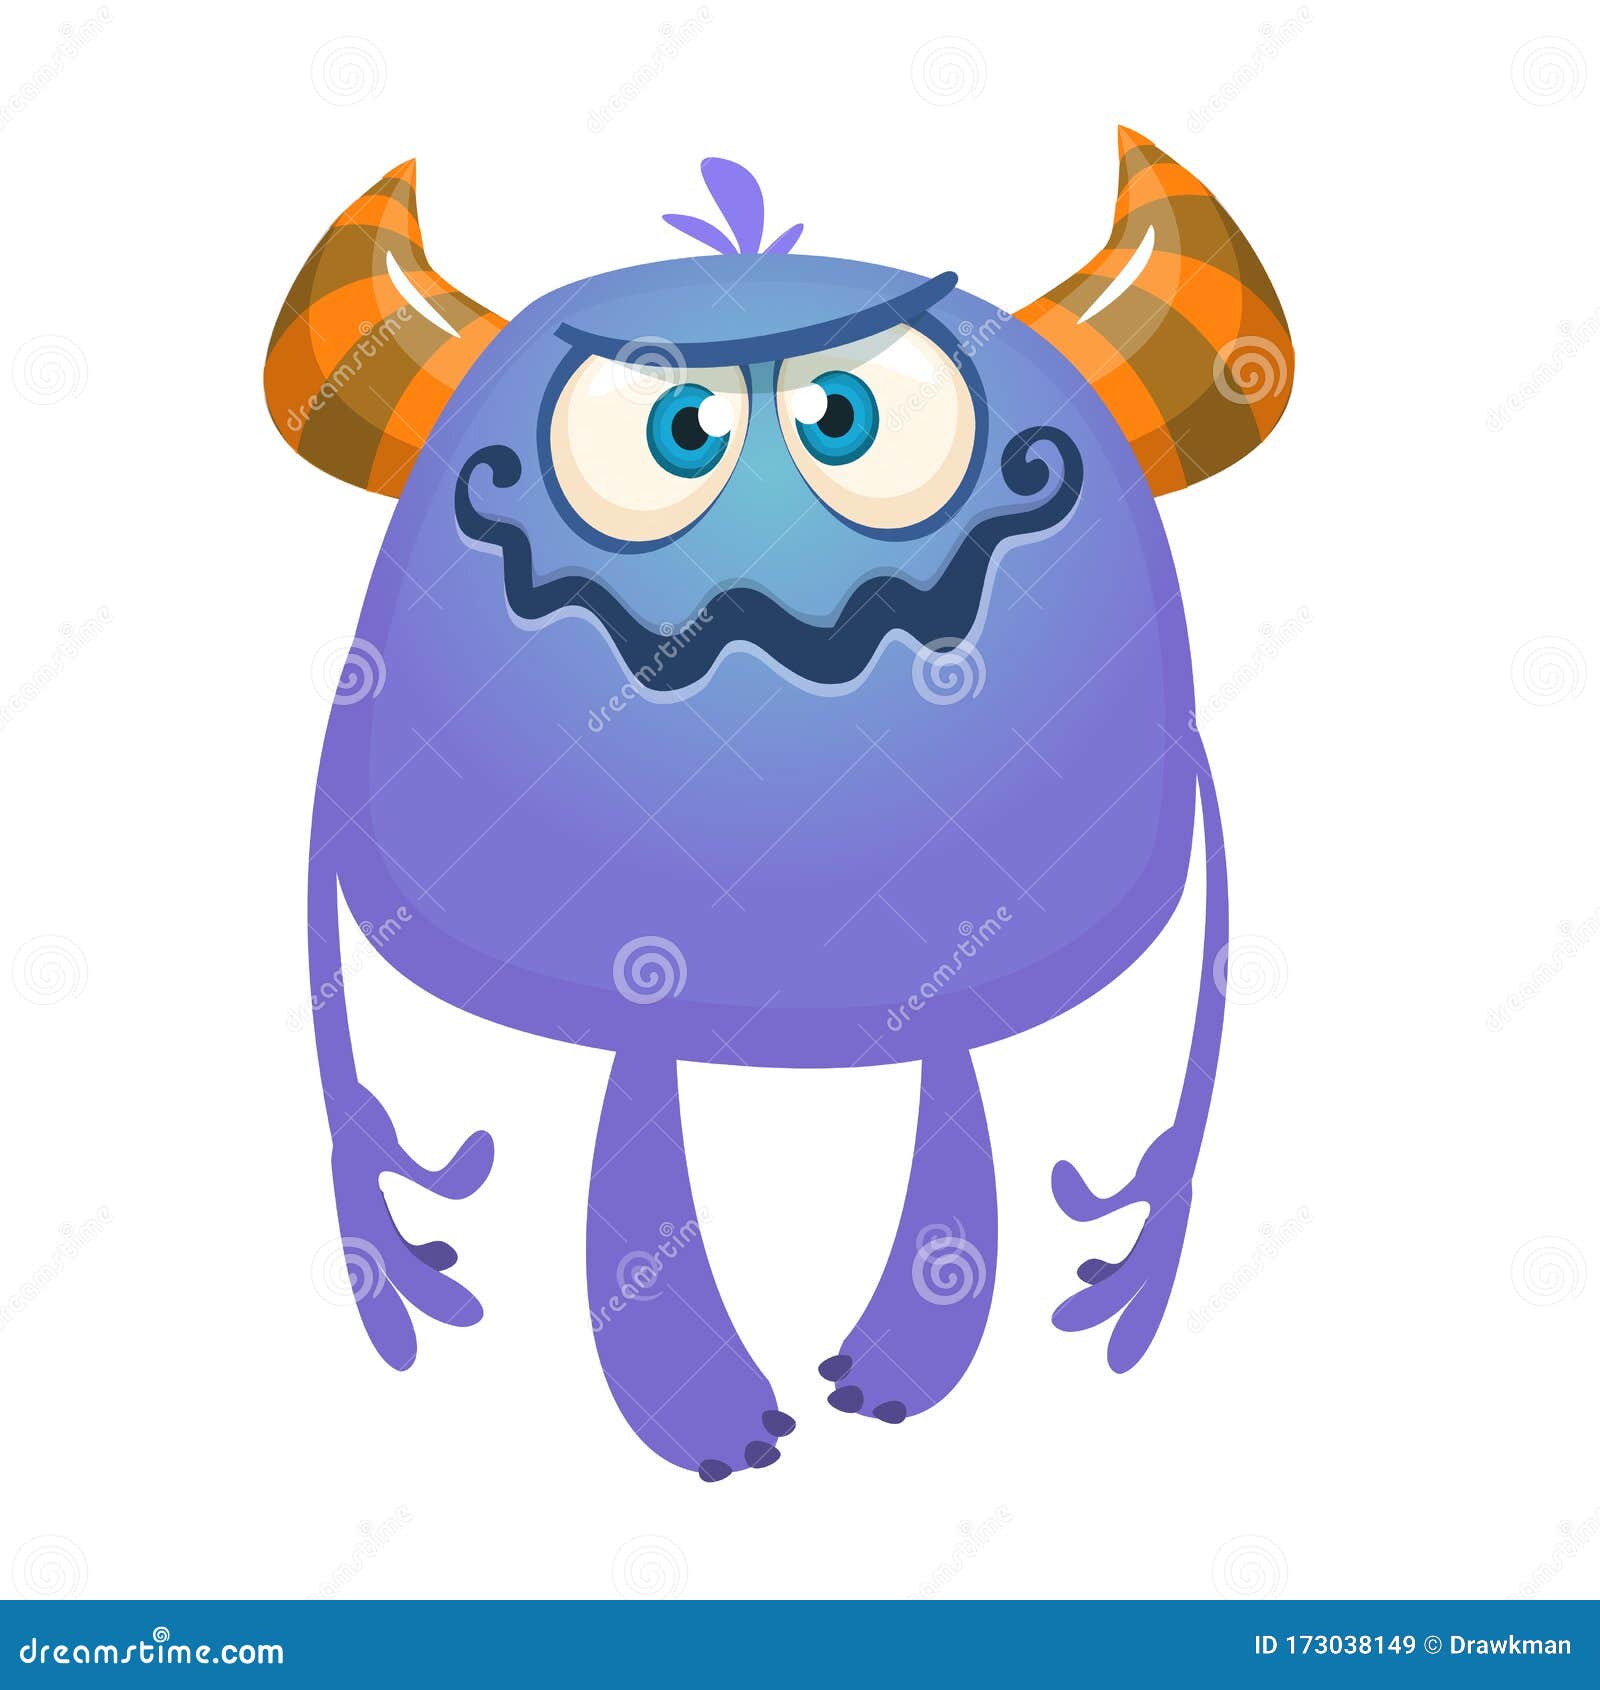 Scary Little Cartoon Monster. Vector Illustration of Cute Monster Character  Design Stock Vector - Illustration of excited, creature: 173038149